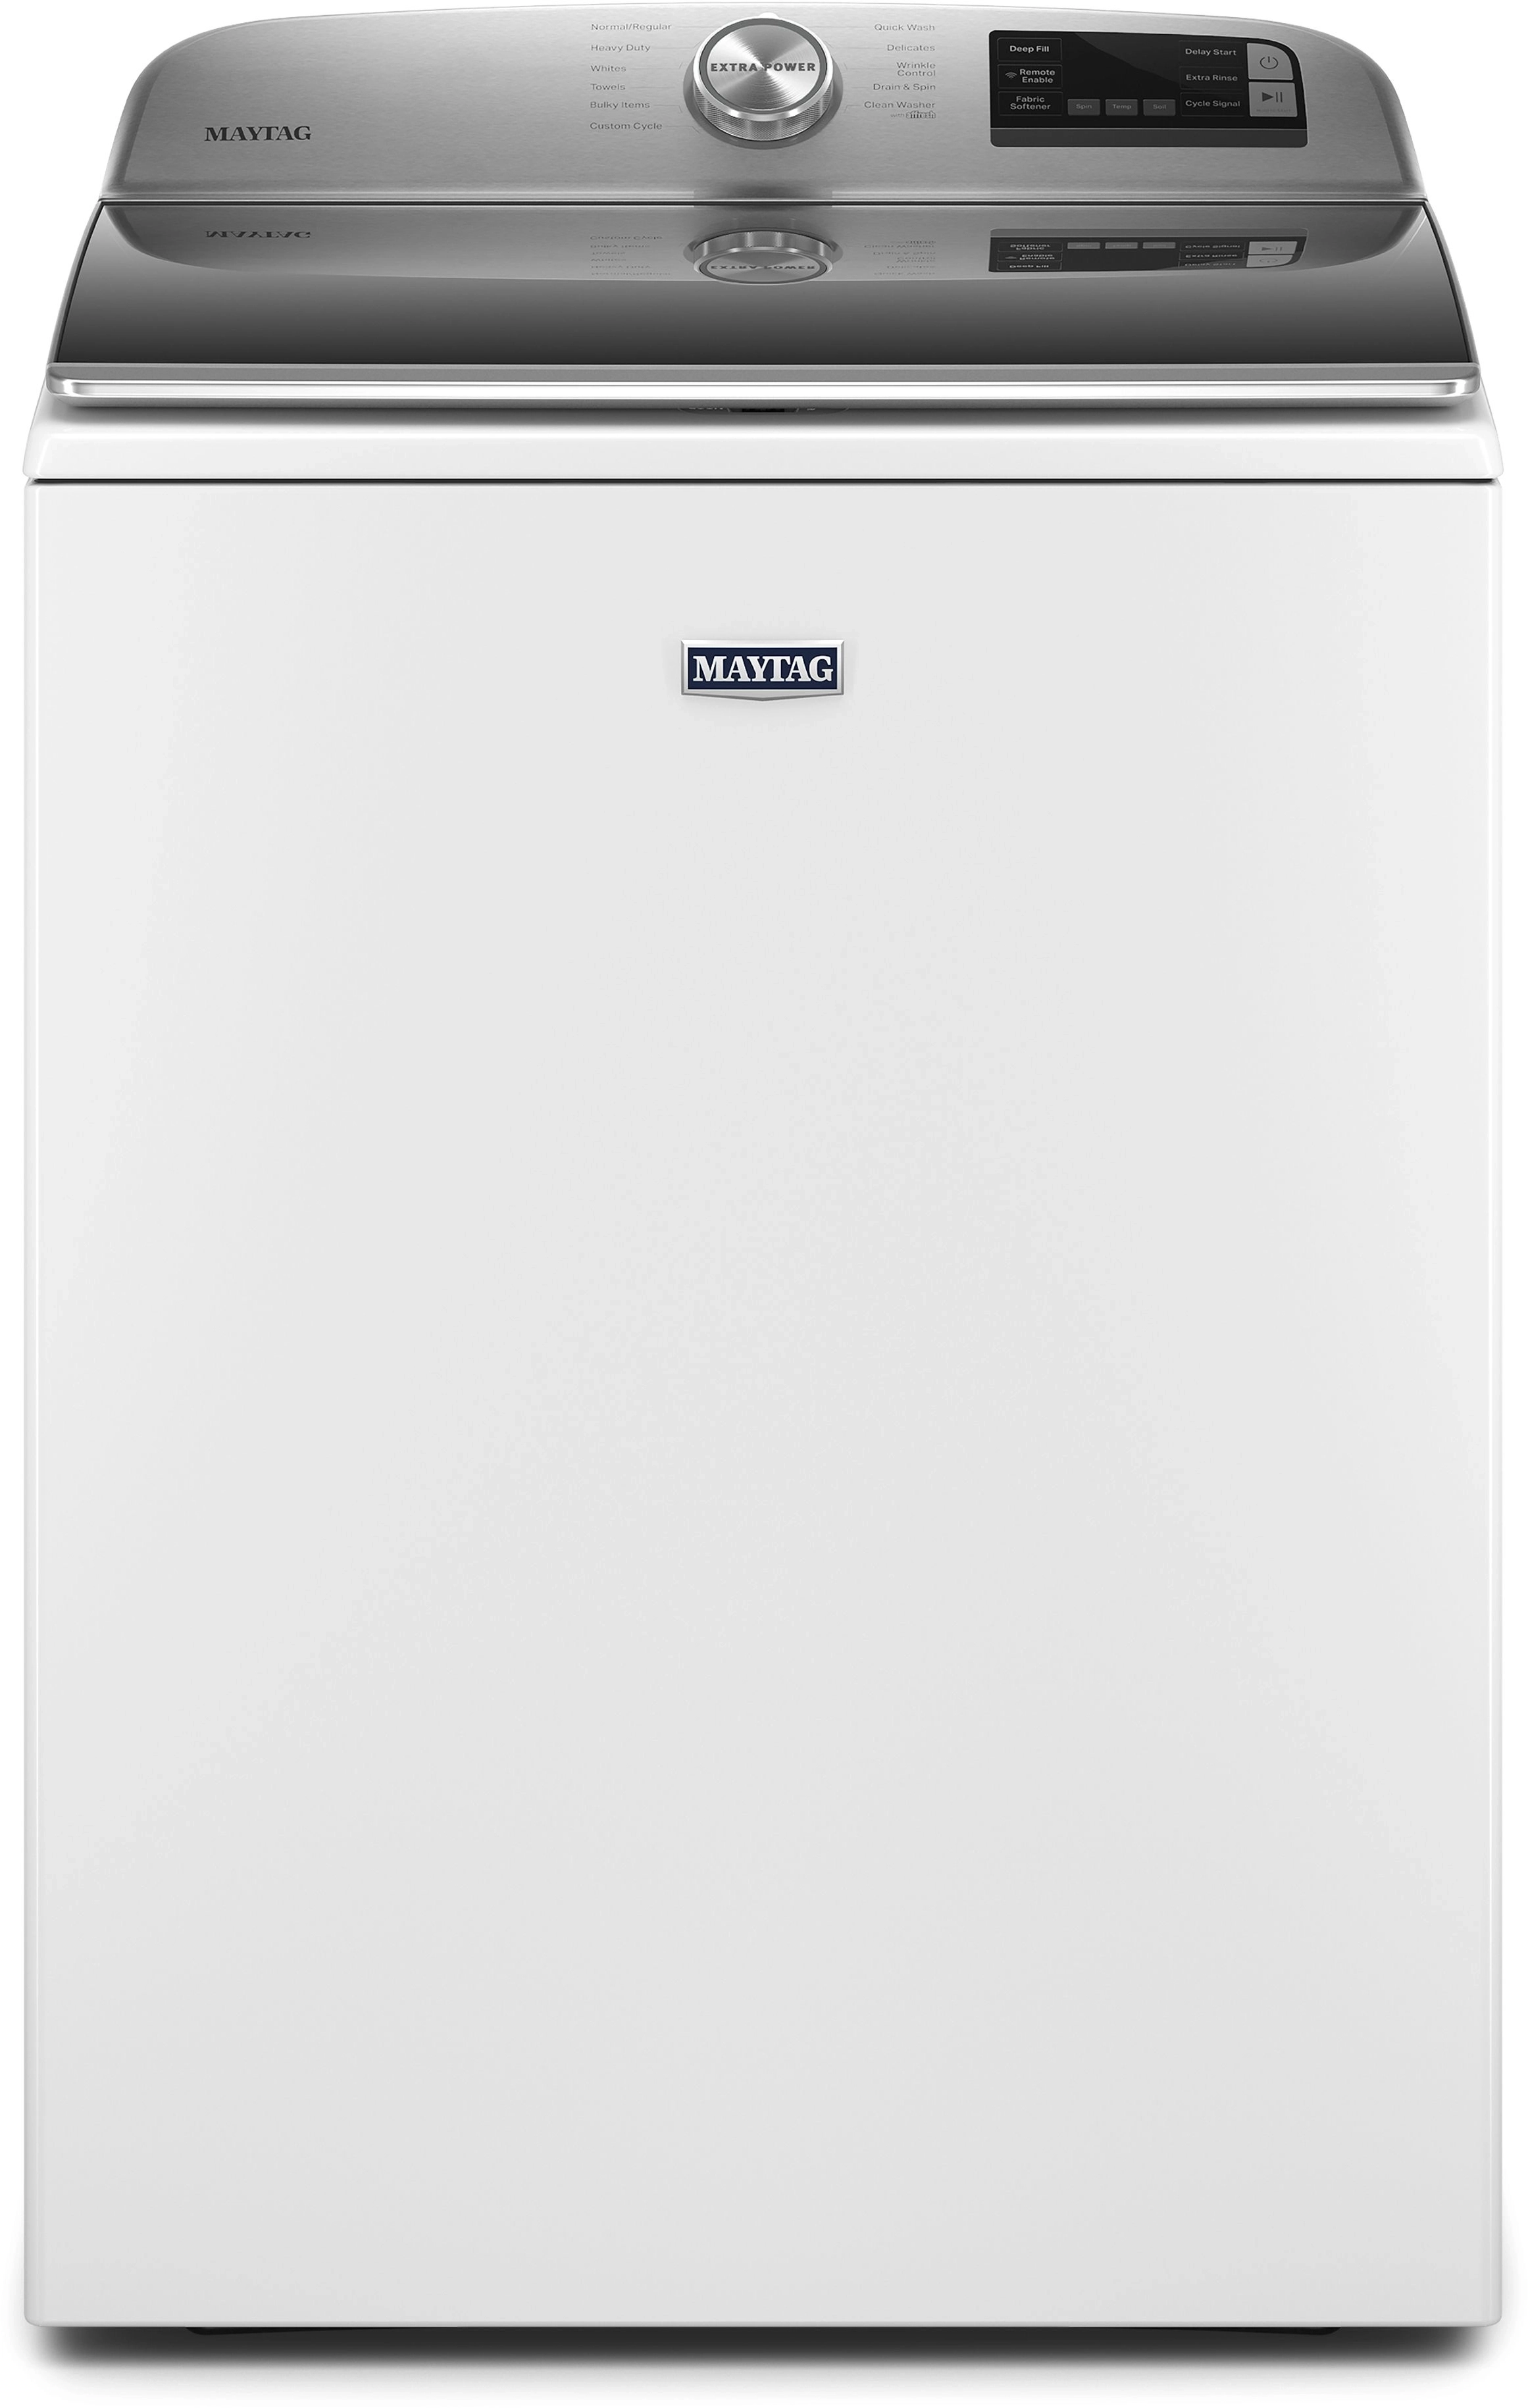 Maytag 28 Inch Smart Top Load Washer with 11 Wash Cycles